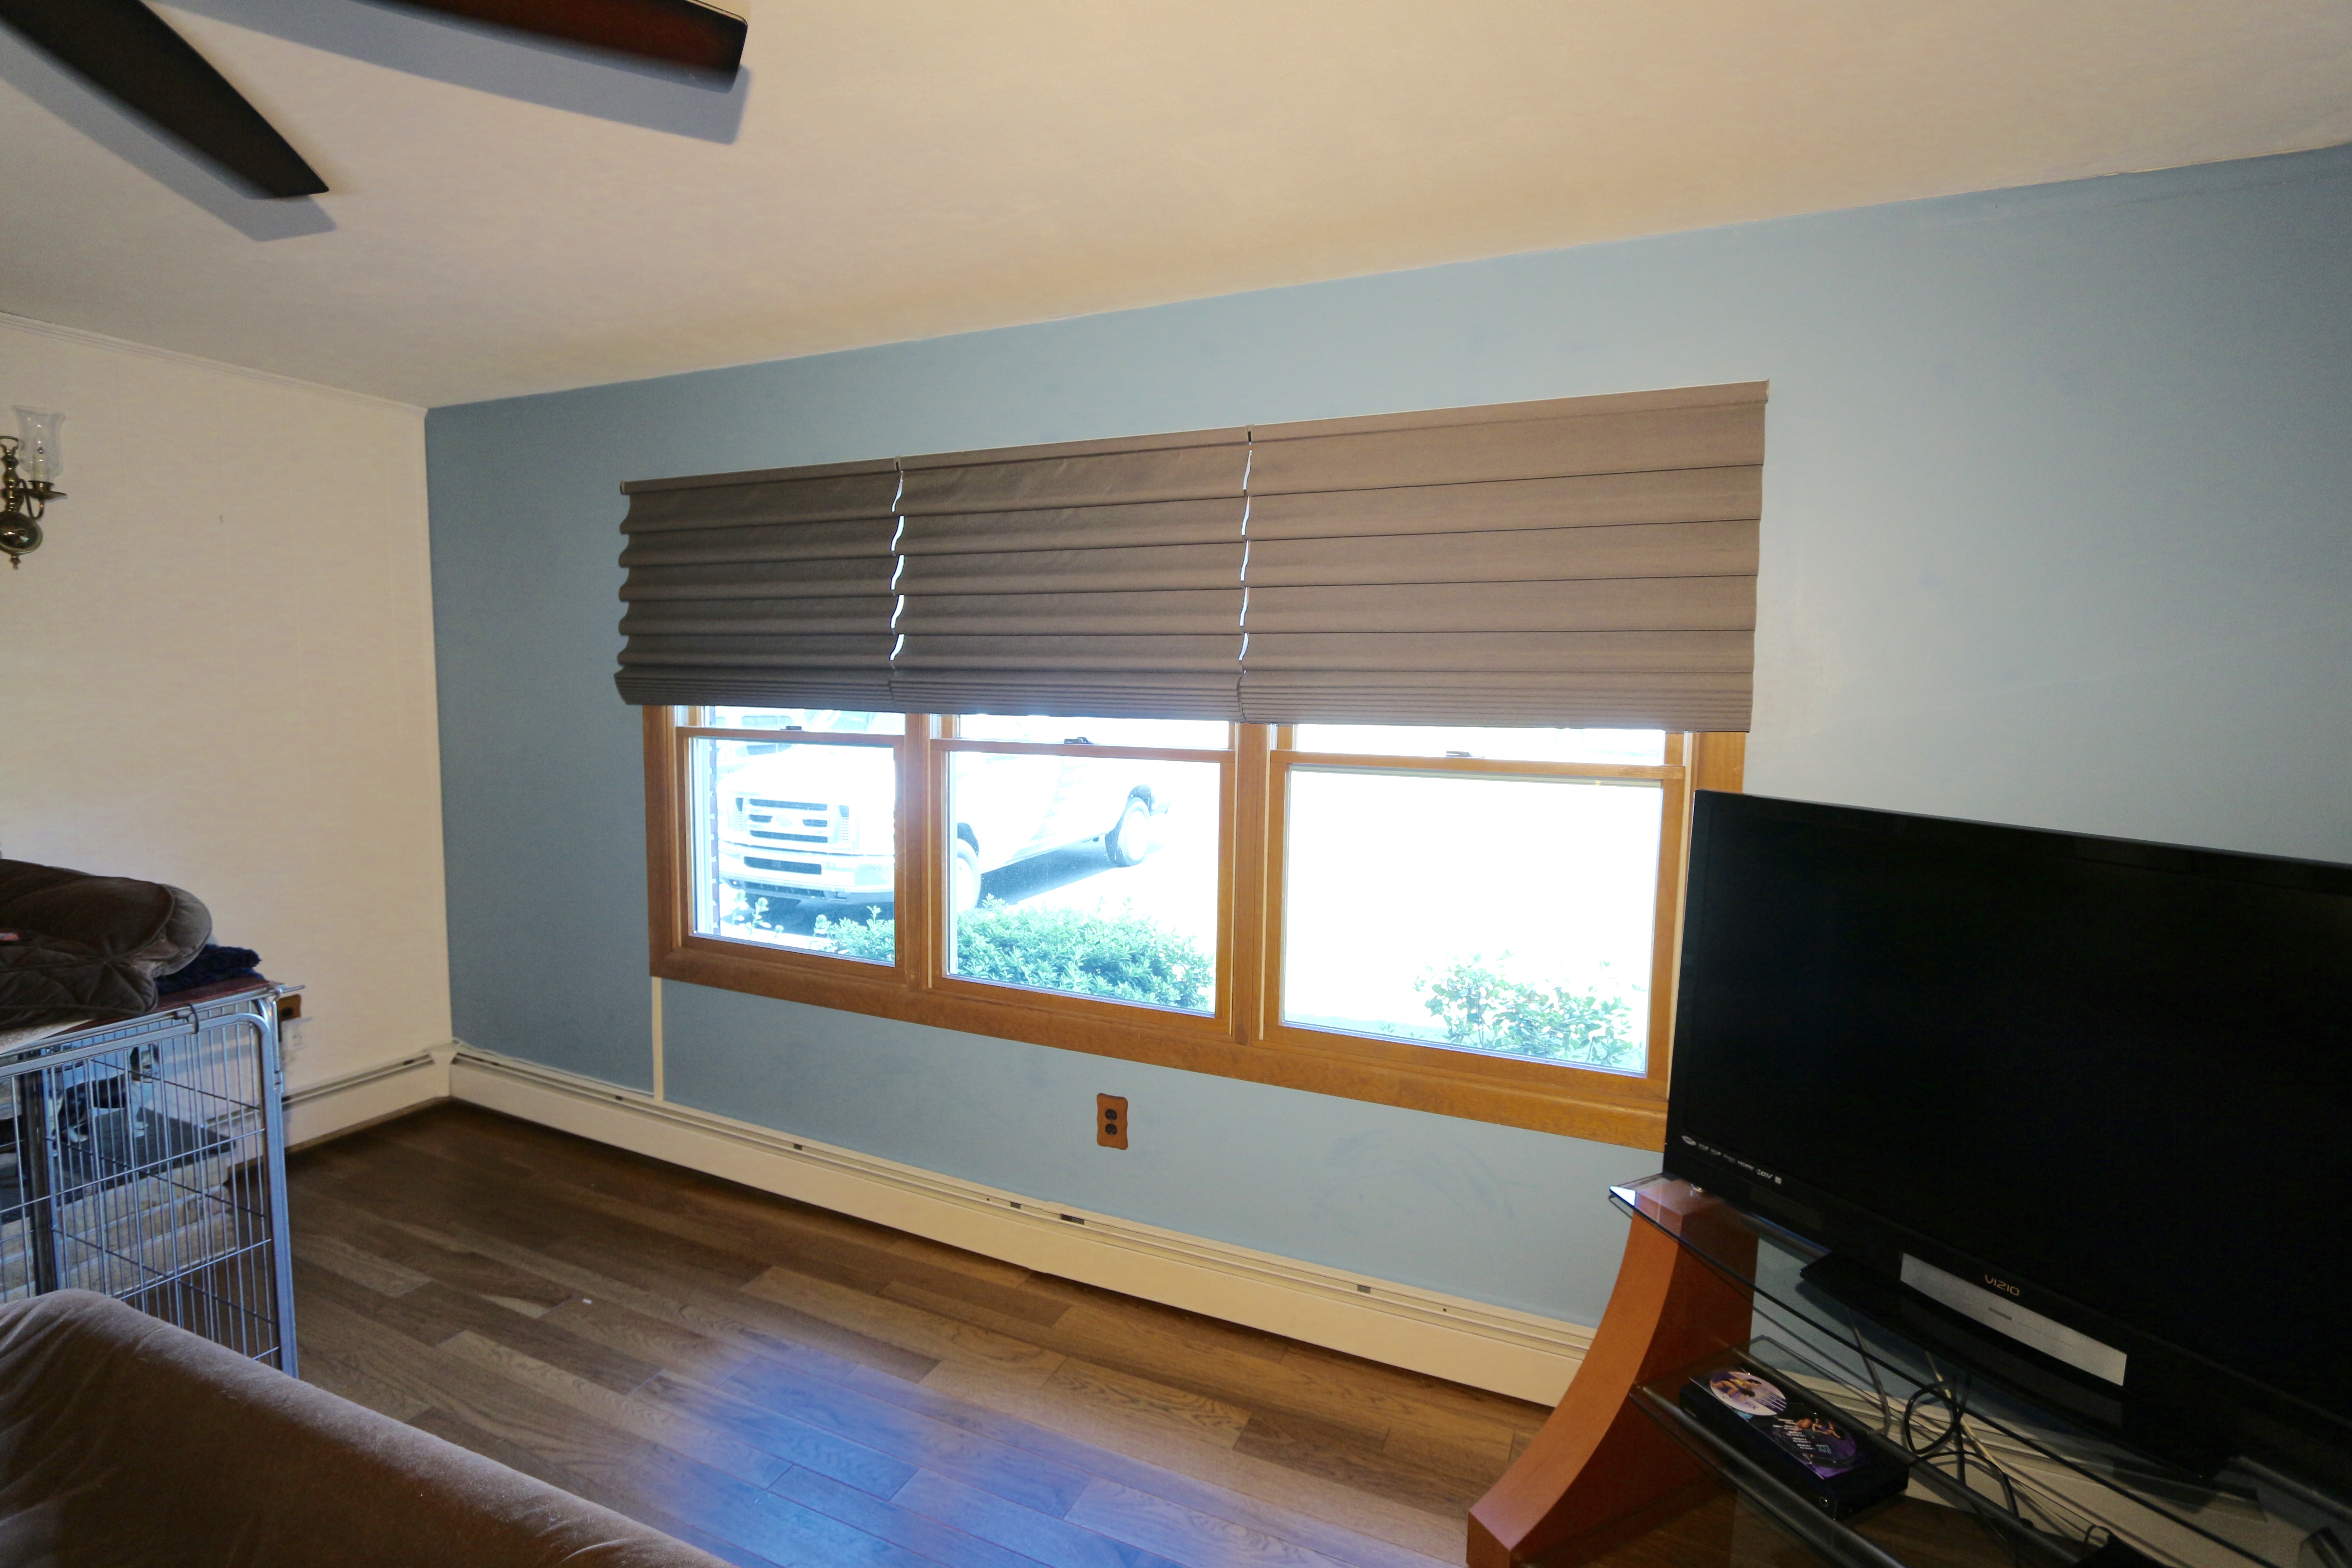 Vignette Shades; Plug in Motorization and Cordless